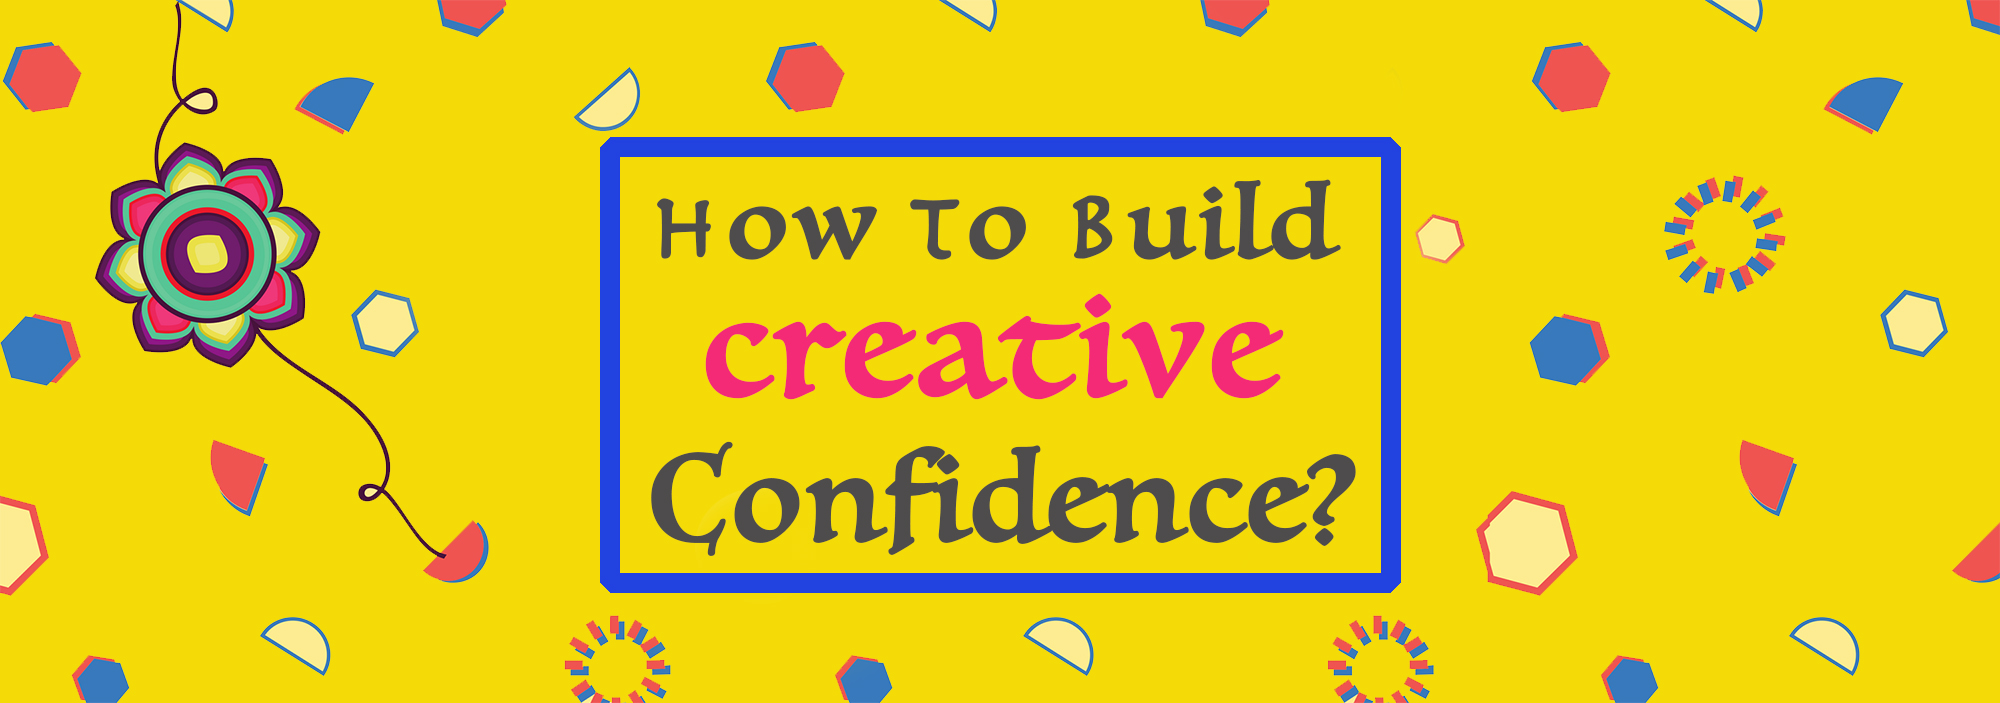 What is creativity and how to build creative confidence?